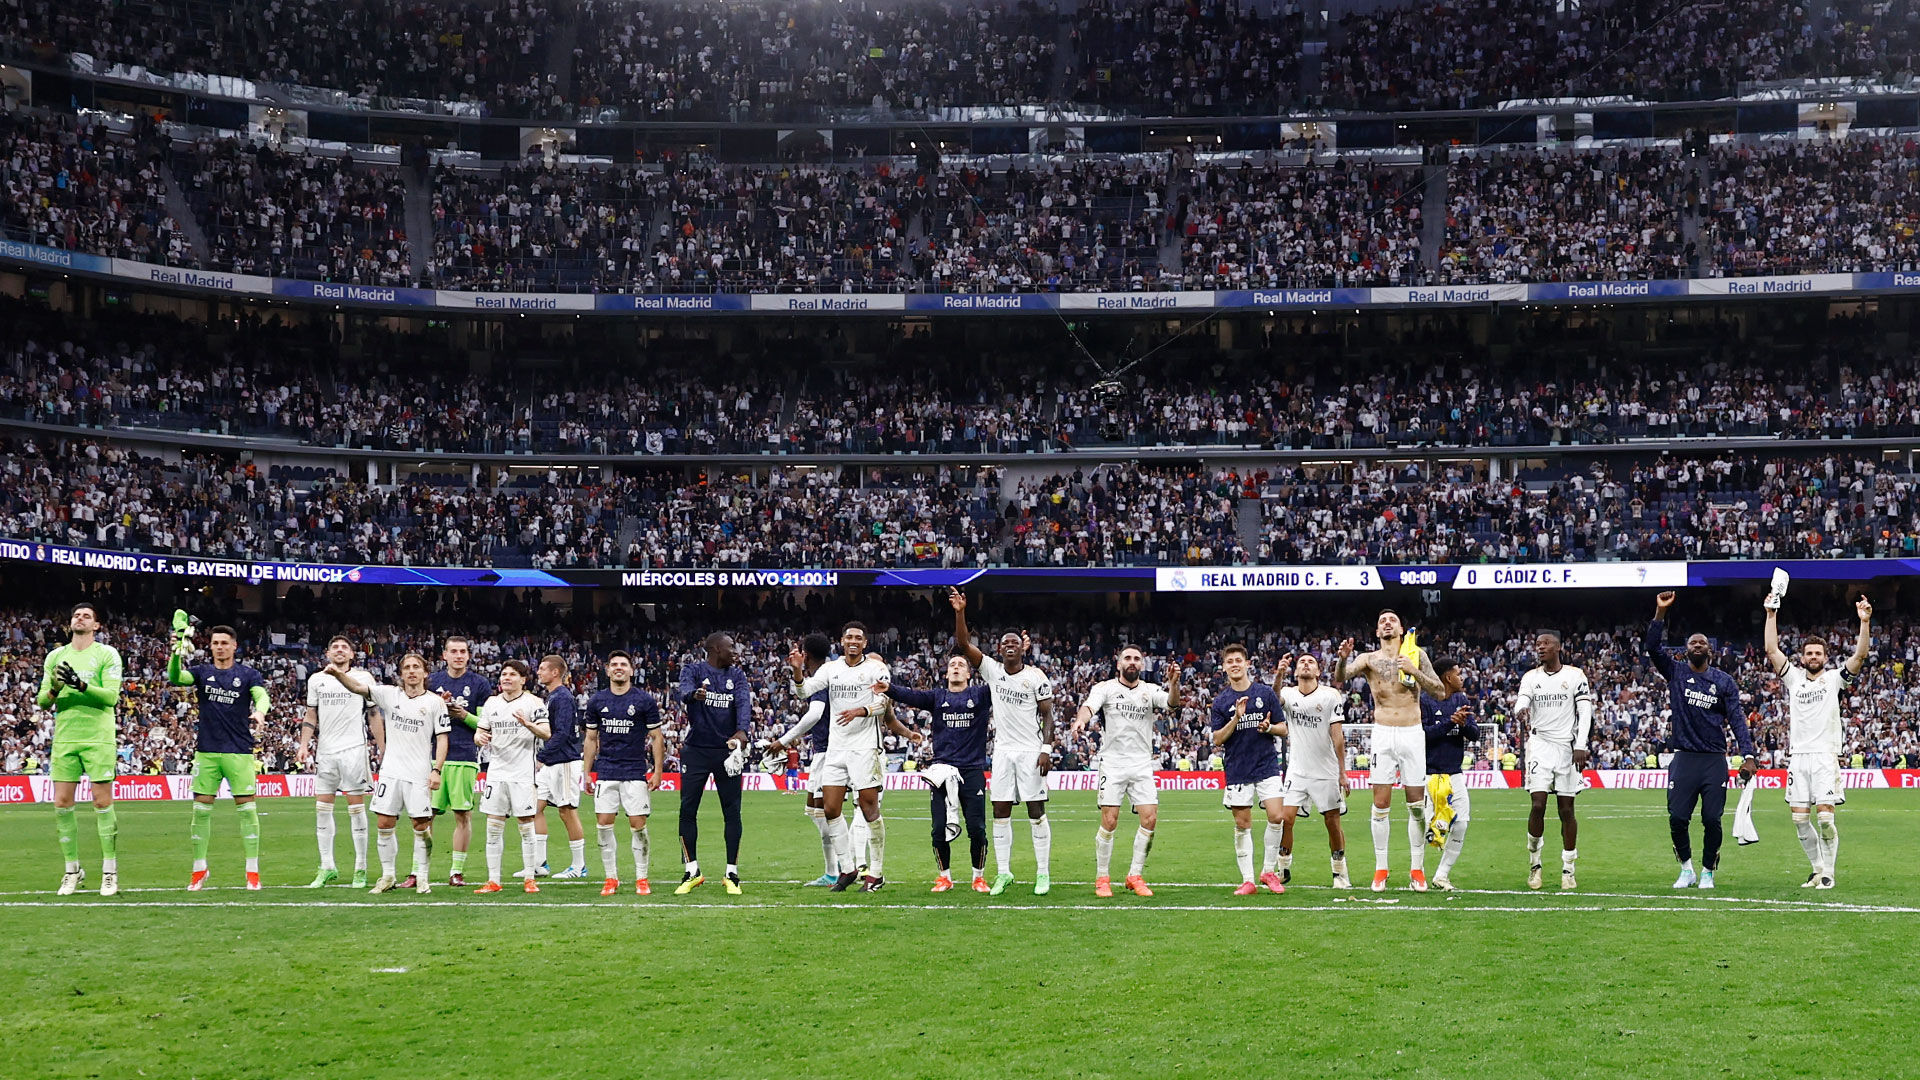 Real Madrid to present their 36th LaLiga trophy